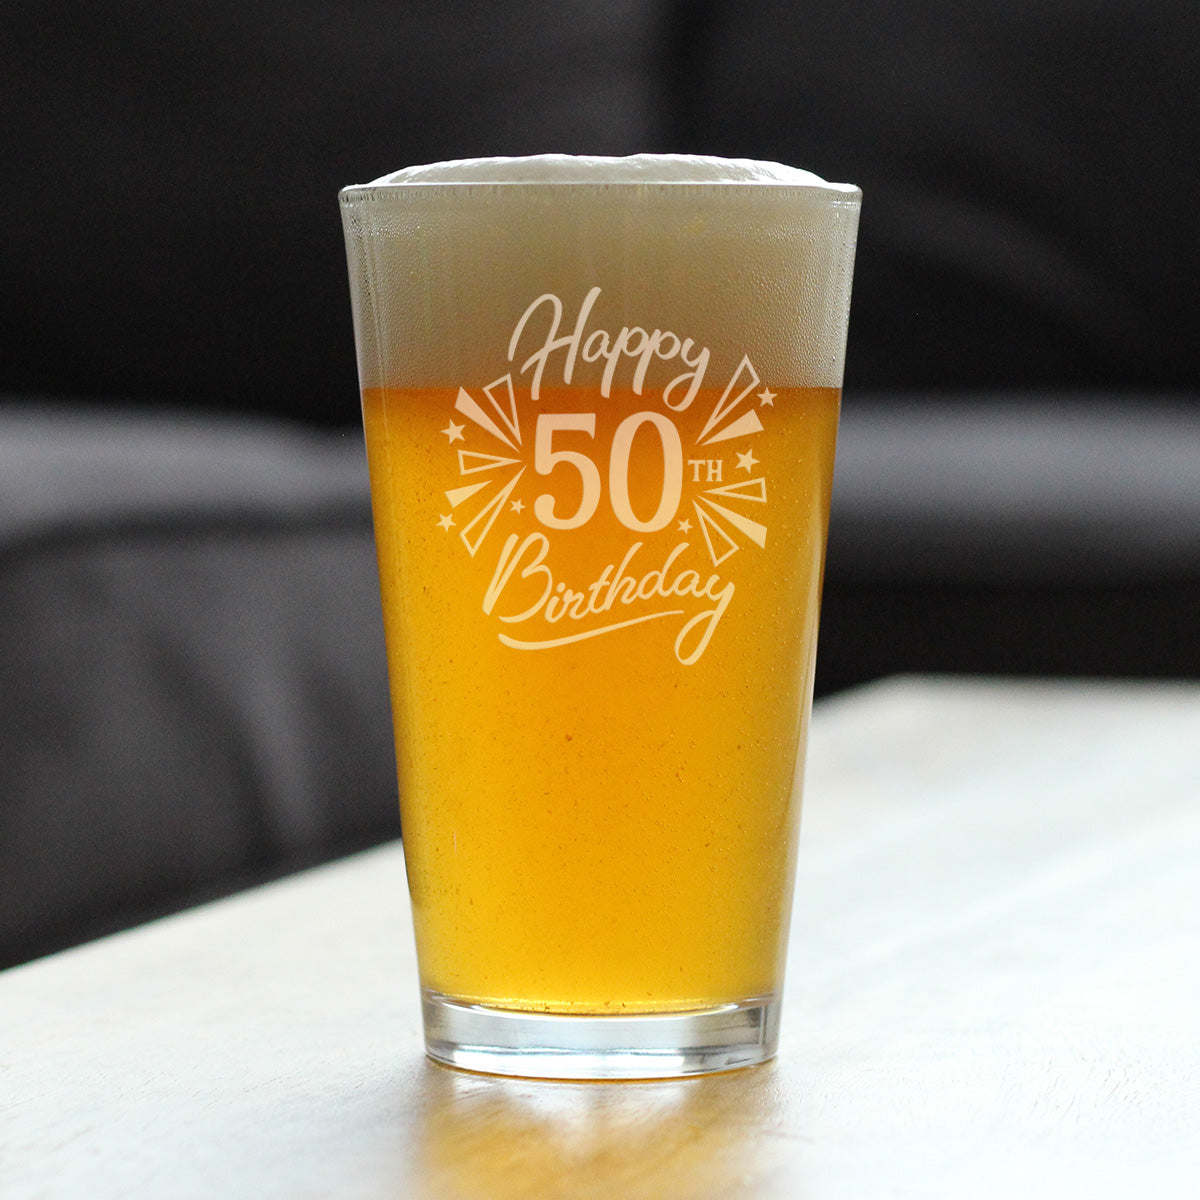 Happy 50th Birthday - Pint Glass for Beer - Gifts for Women &amp; Men Turning 50 - Fun Bday Party Decor - 16 Oz